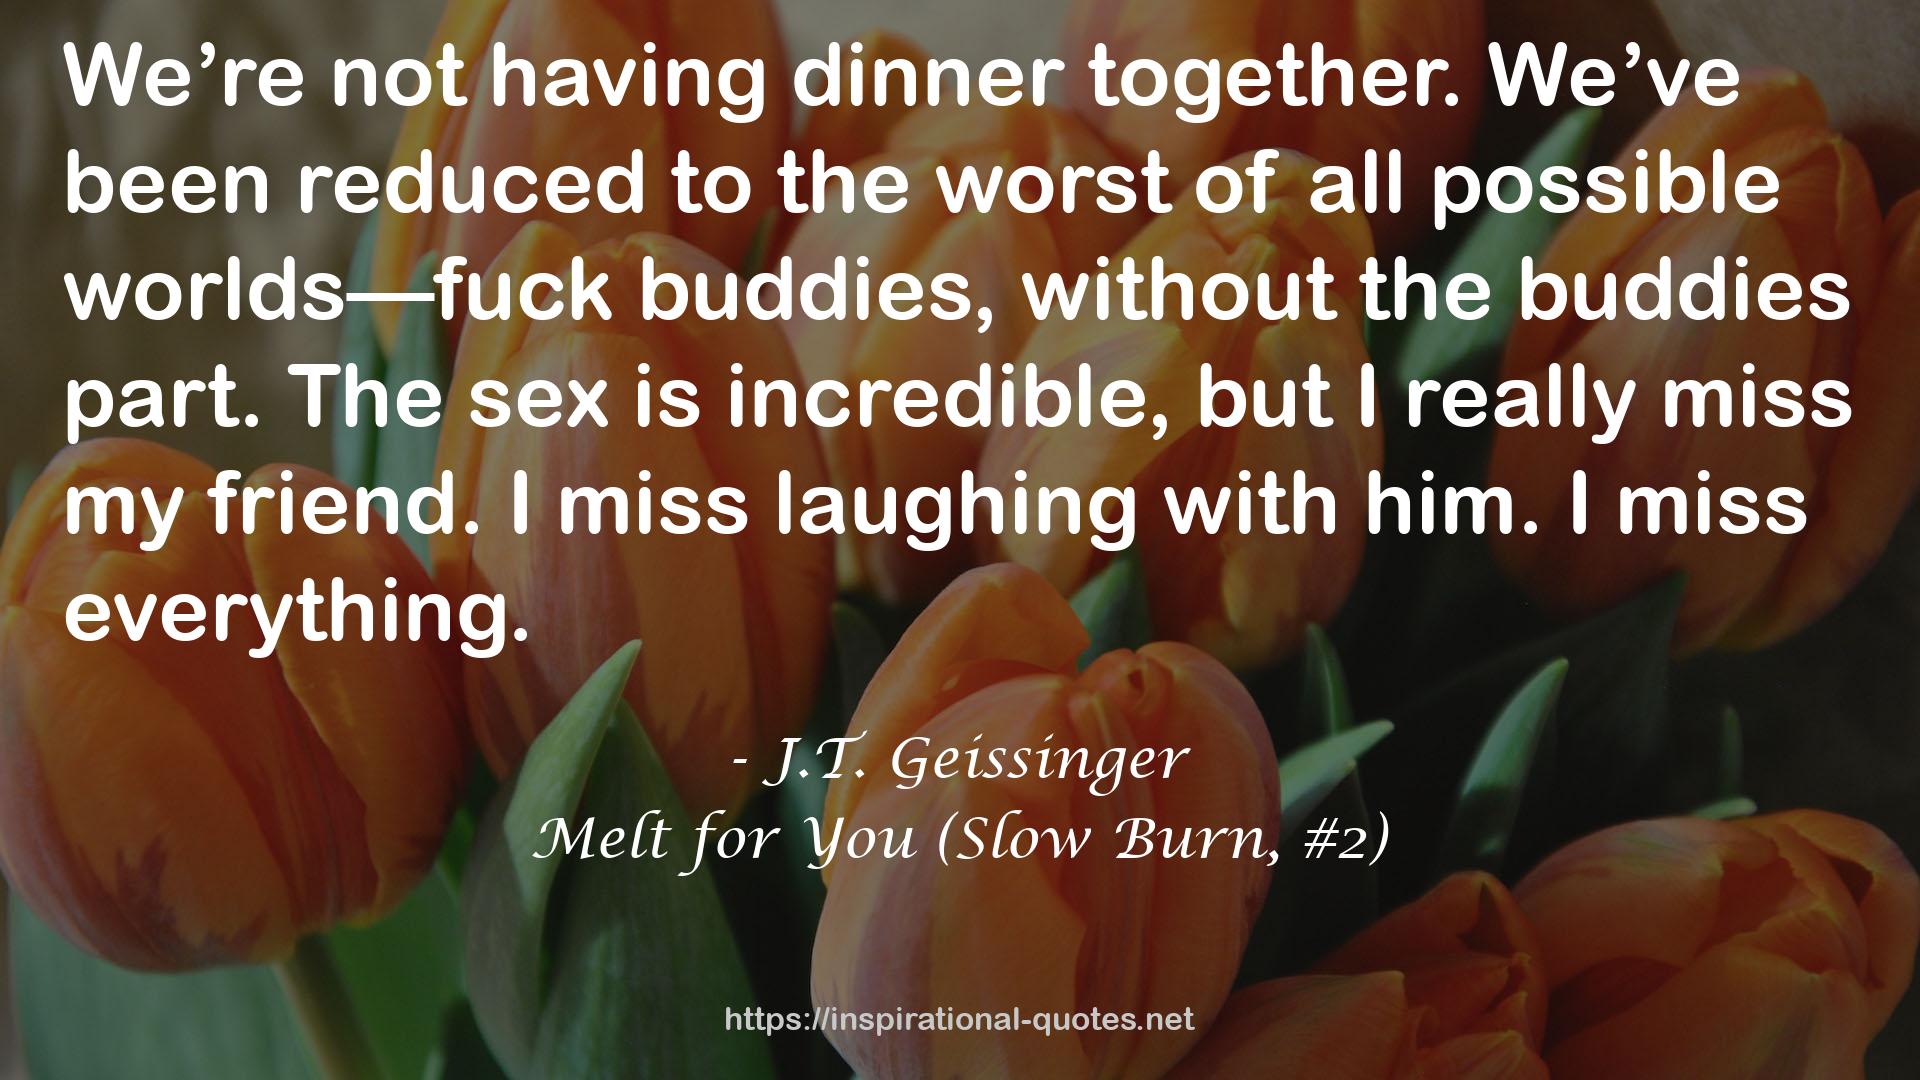 Melt for You (Slow Burn, #2) QUOTES